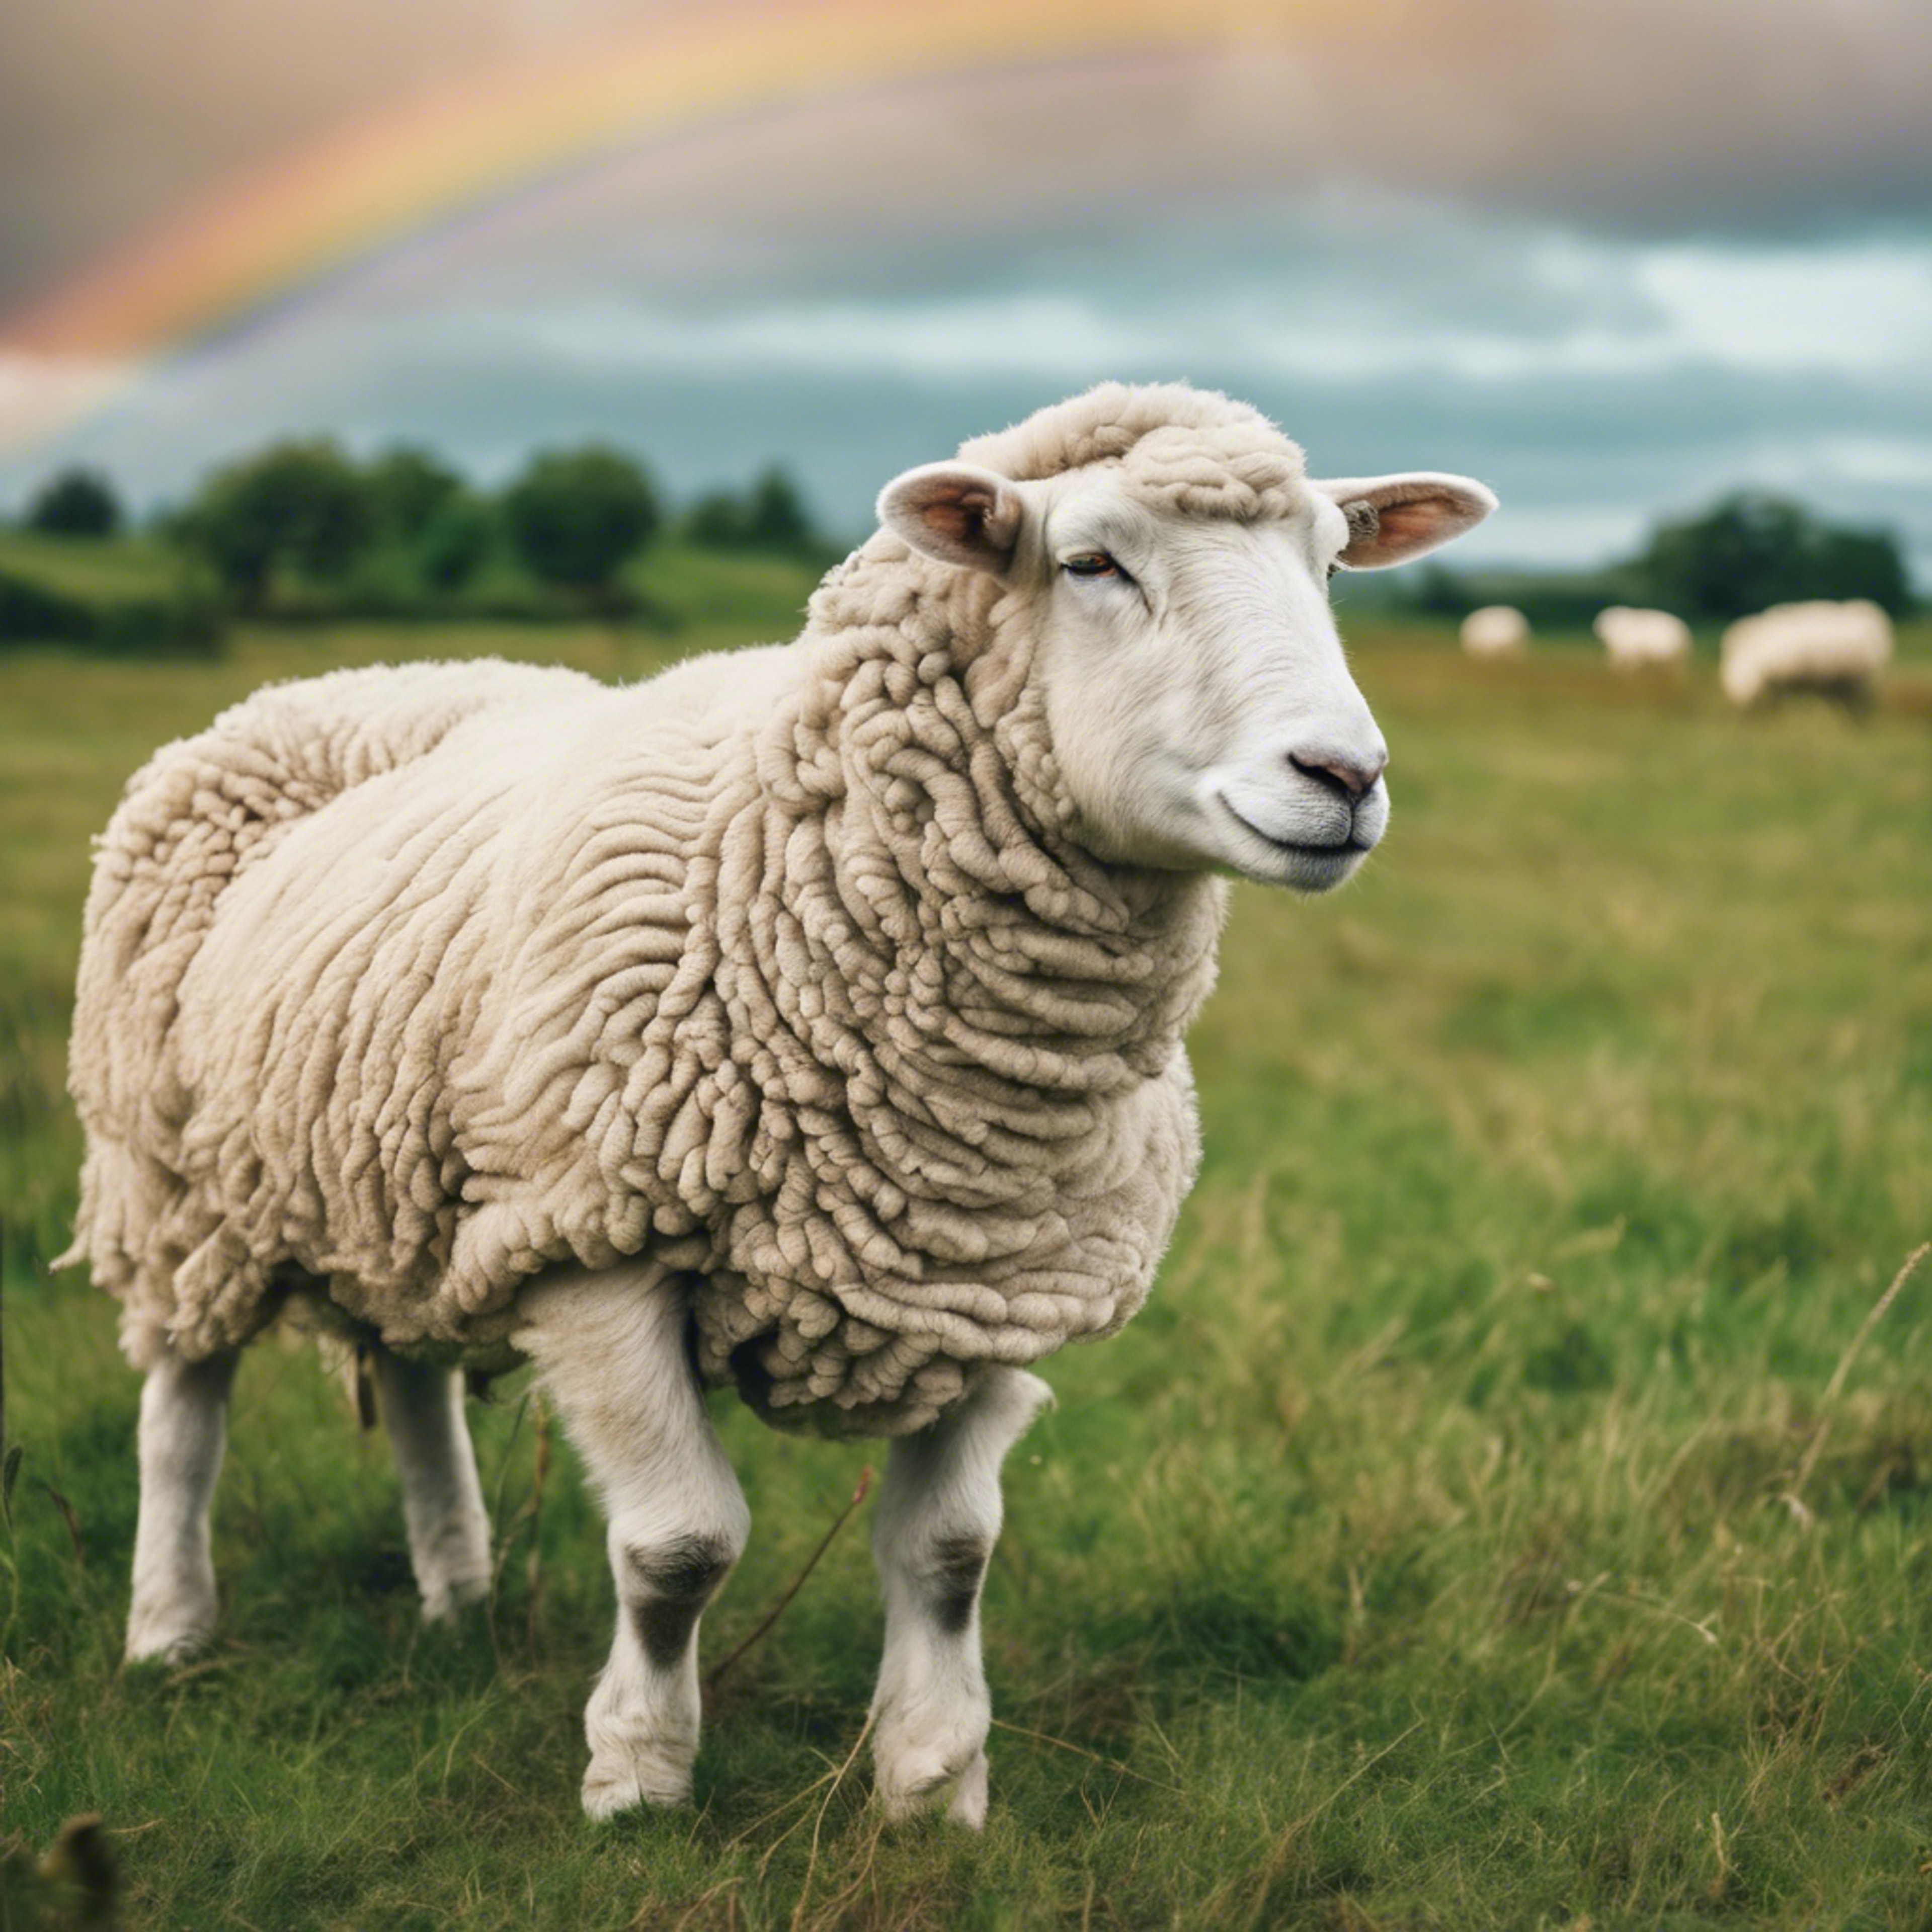 A beautiful open field of grass with puffy white cloud sheep that create rainbow trails as they bound joyfully around. Papel de parede[bc005b864b354d3896db]